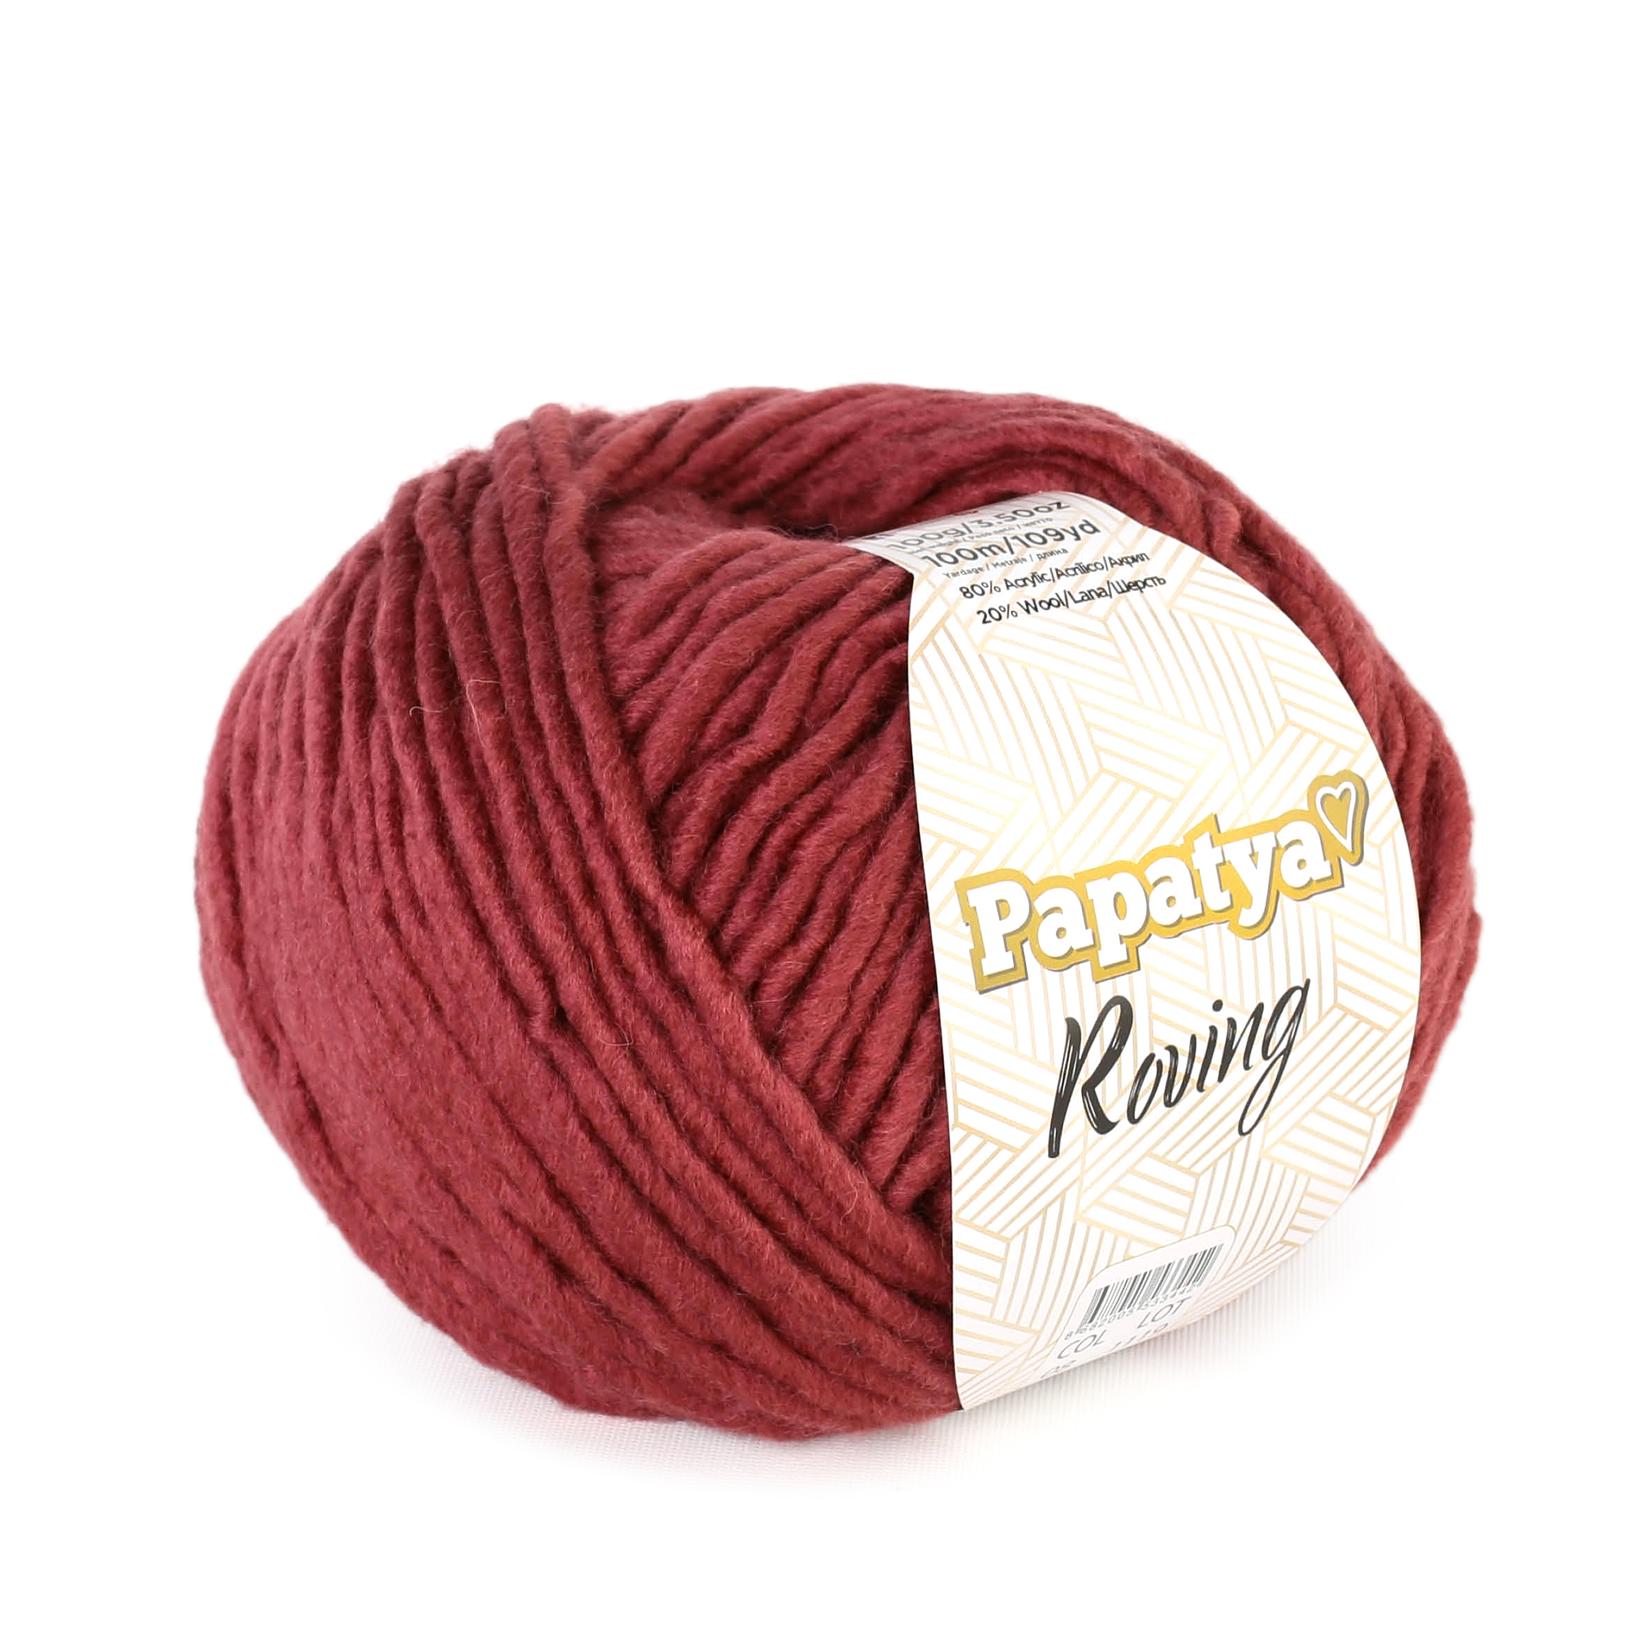 Selected image for PAPATYA Vunica Roving 08